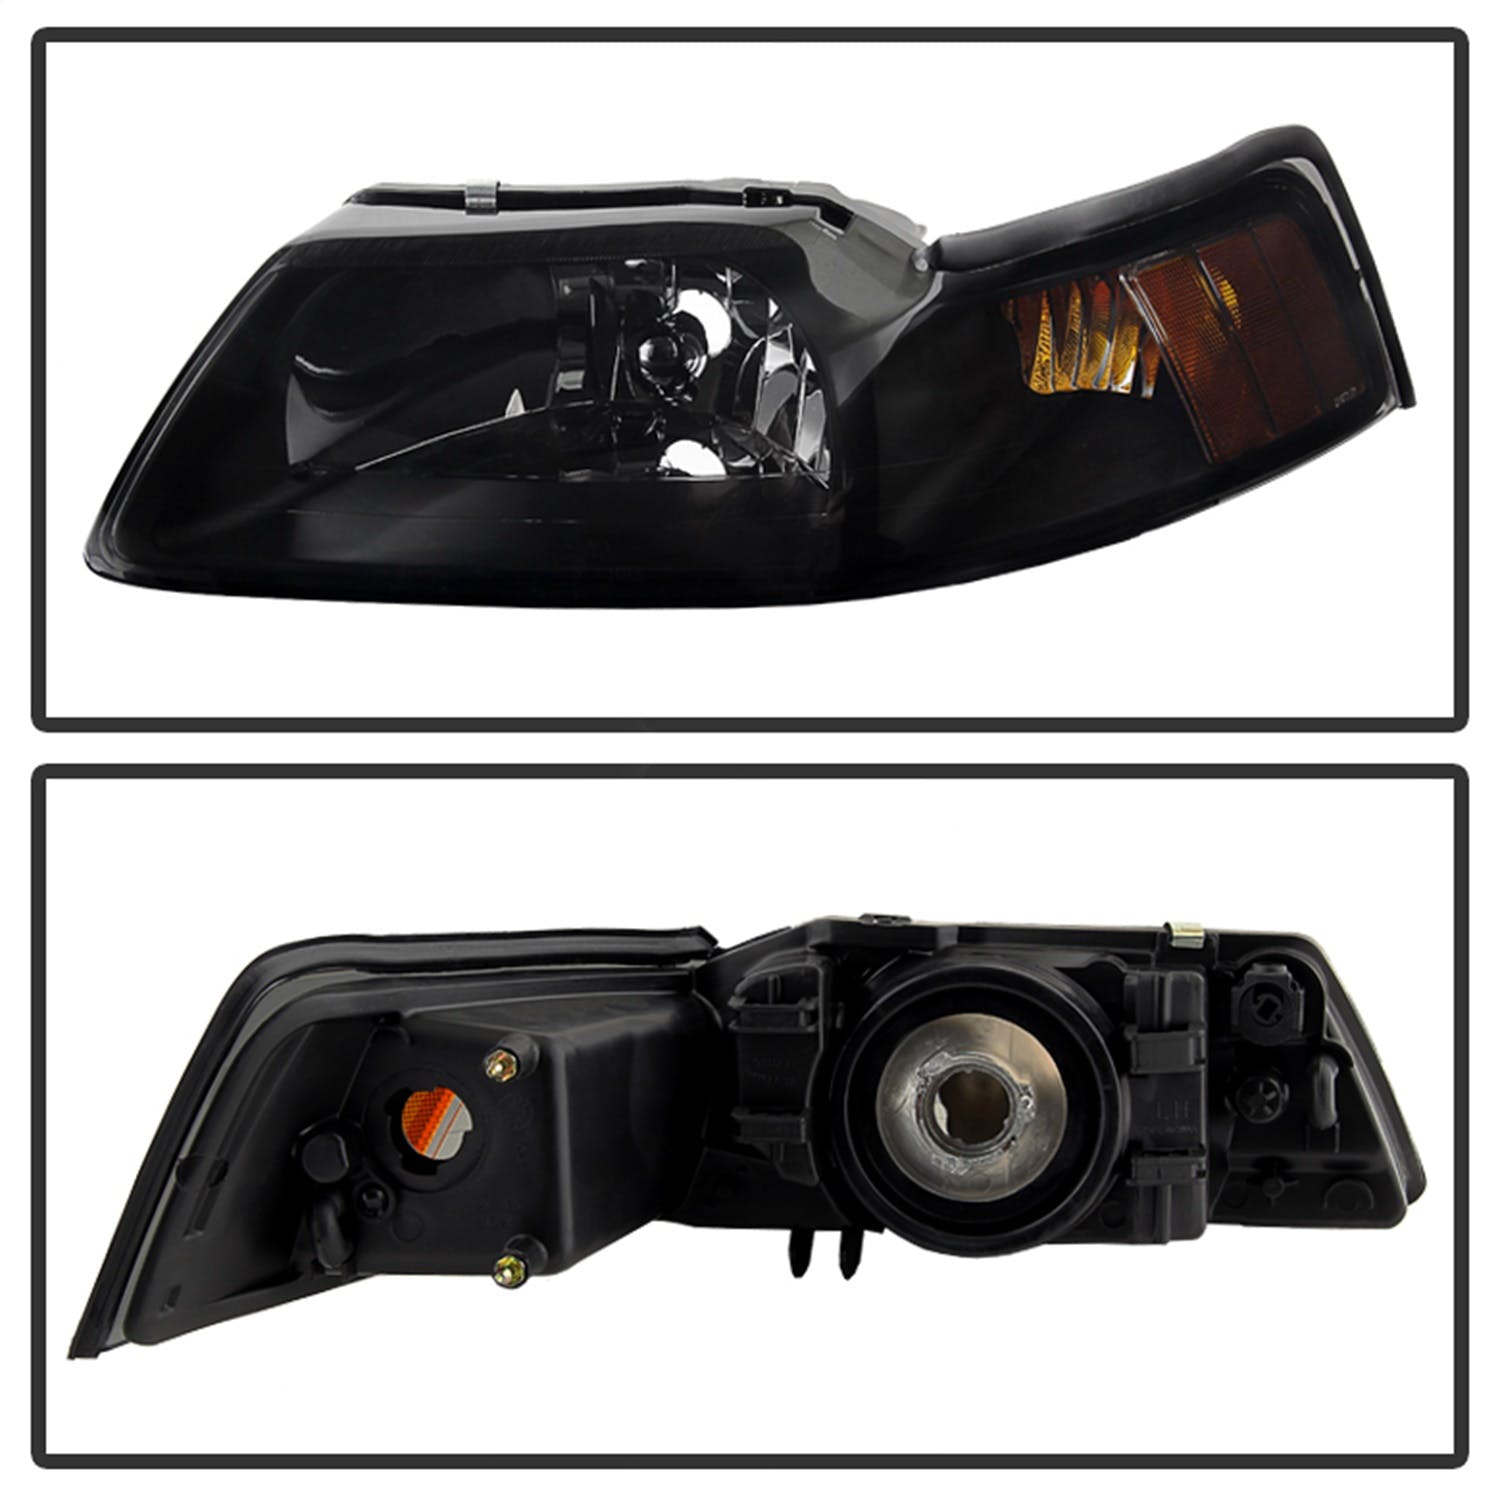 XTUNE POWER 9030345 Ford Mustang 99 04 OEM Amber Headlights Black Smoked